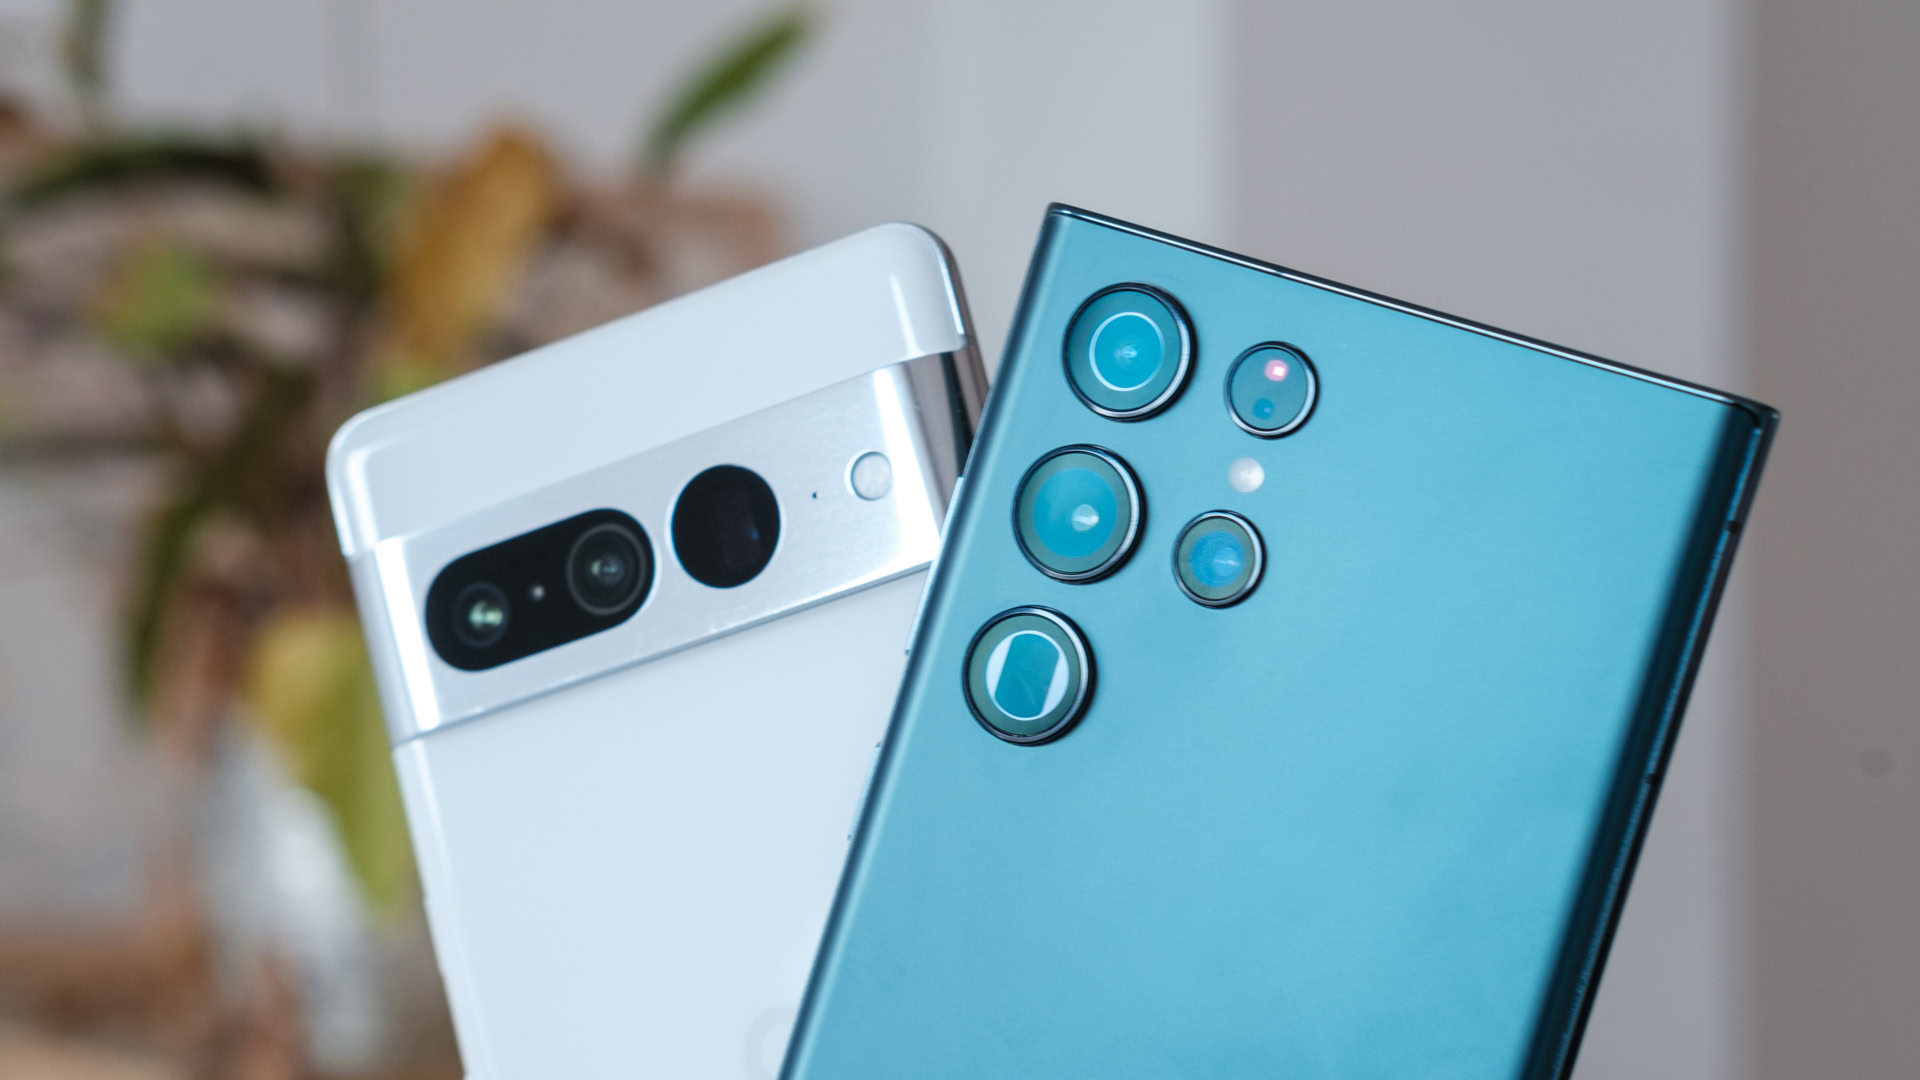 The Pixel 7 Pro and Galaxy S22 Ultra are among the Black Friday 2022 sales